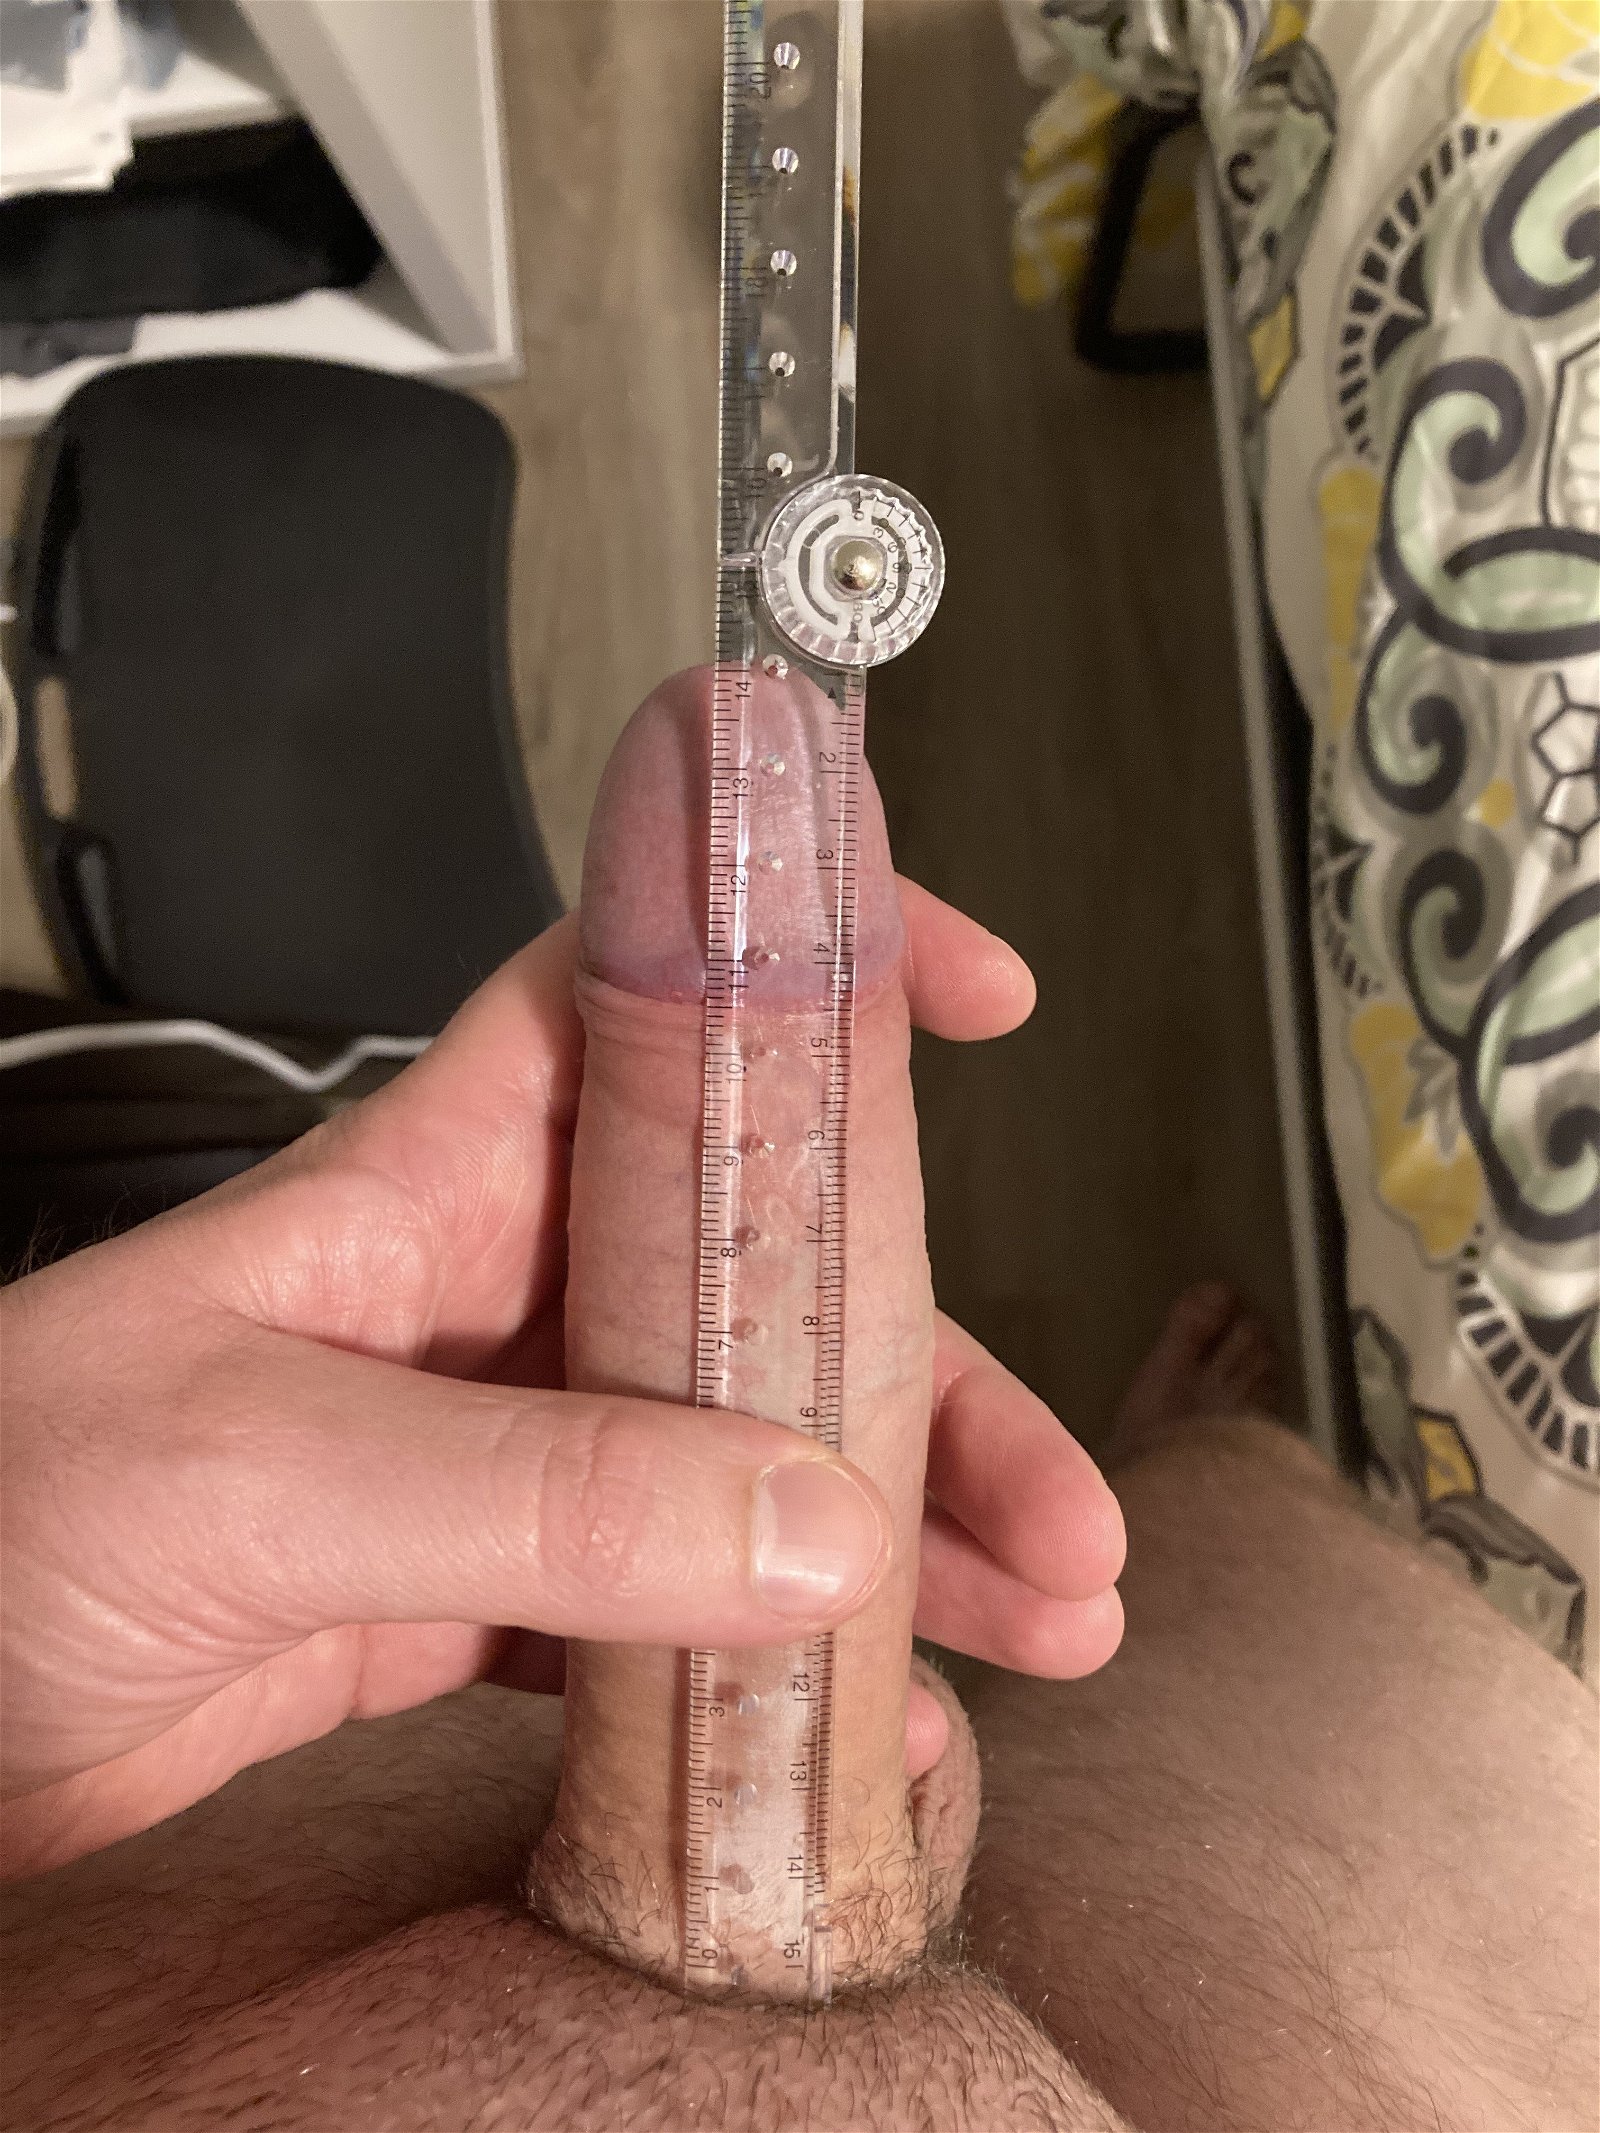 Photo by Master4slave with the username @Master4slave, who is a verified user,  July 19, 2022 at 1:34 PM. The post is about the topic Penile Traction and the text says 'A couple weeks ago I had found Penile Traction. adter reading about it I thought I would give it a try with #maleedge fingers crossed it can help increase my length. this is a before pic and the devise on. i have been doing it for 9 days now and I havent..'